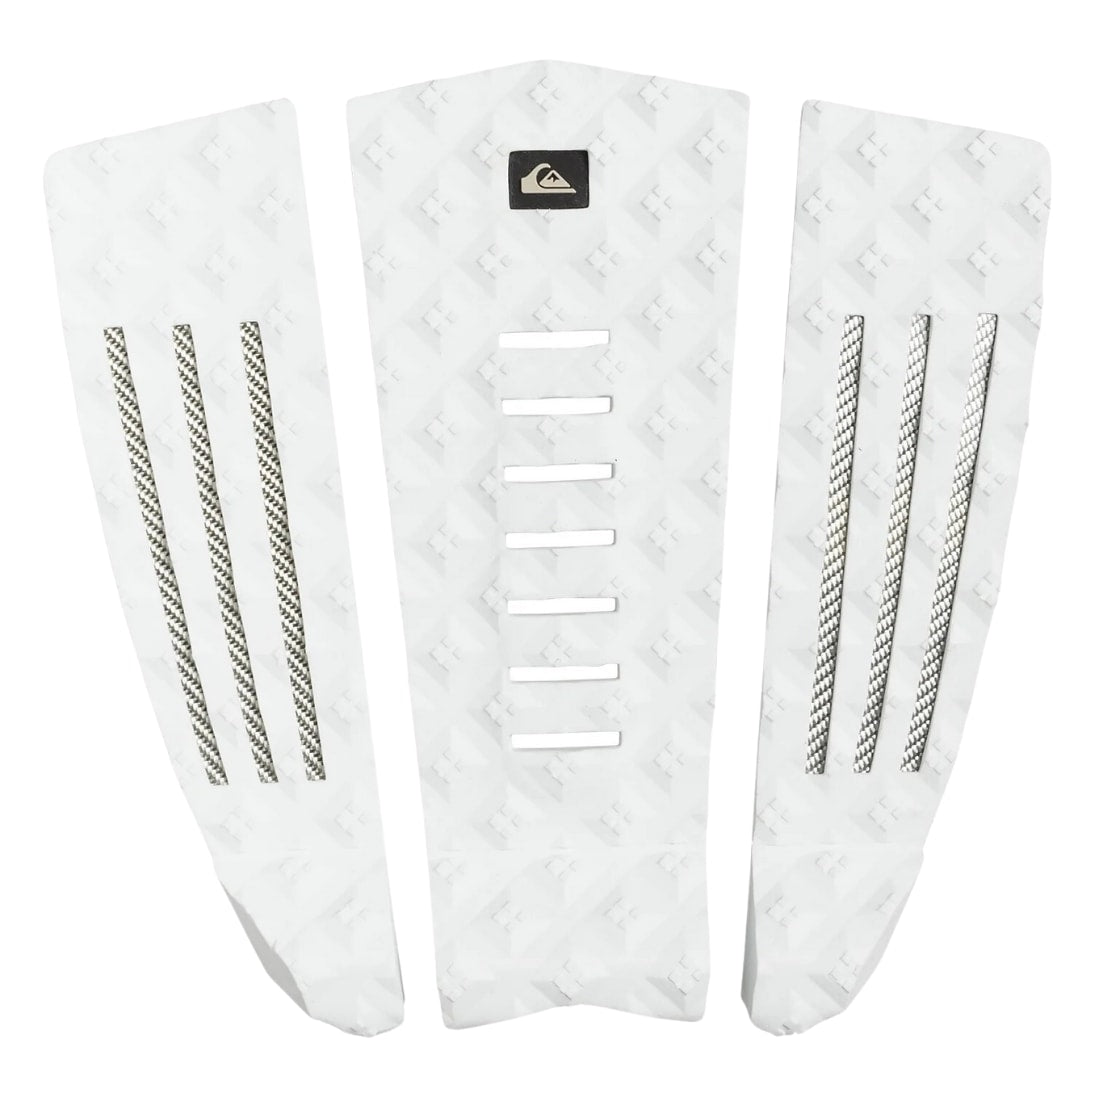 Quiksilver Carbon LC6 Tail Pad - White - 3 Piece Tail Pad by Quiksilver